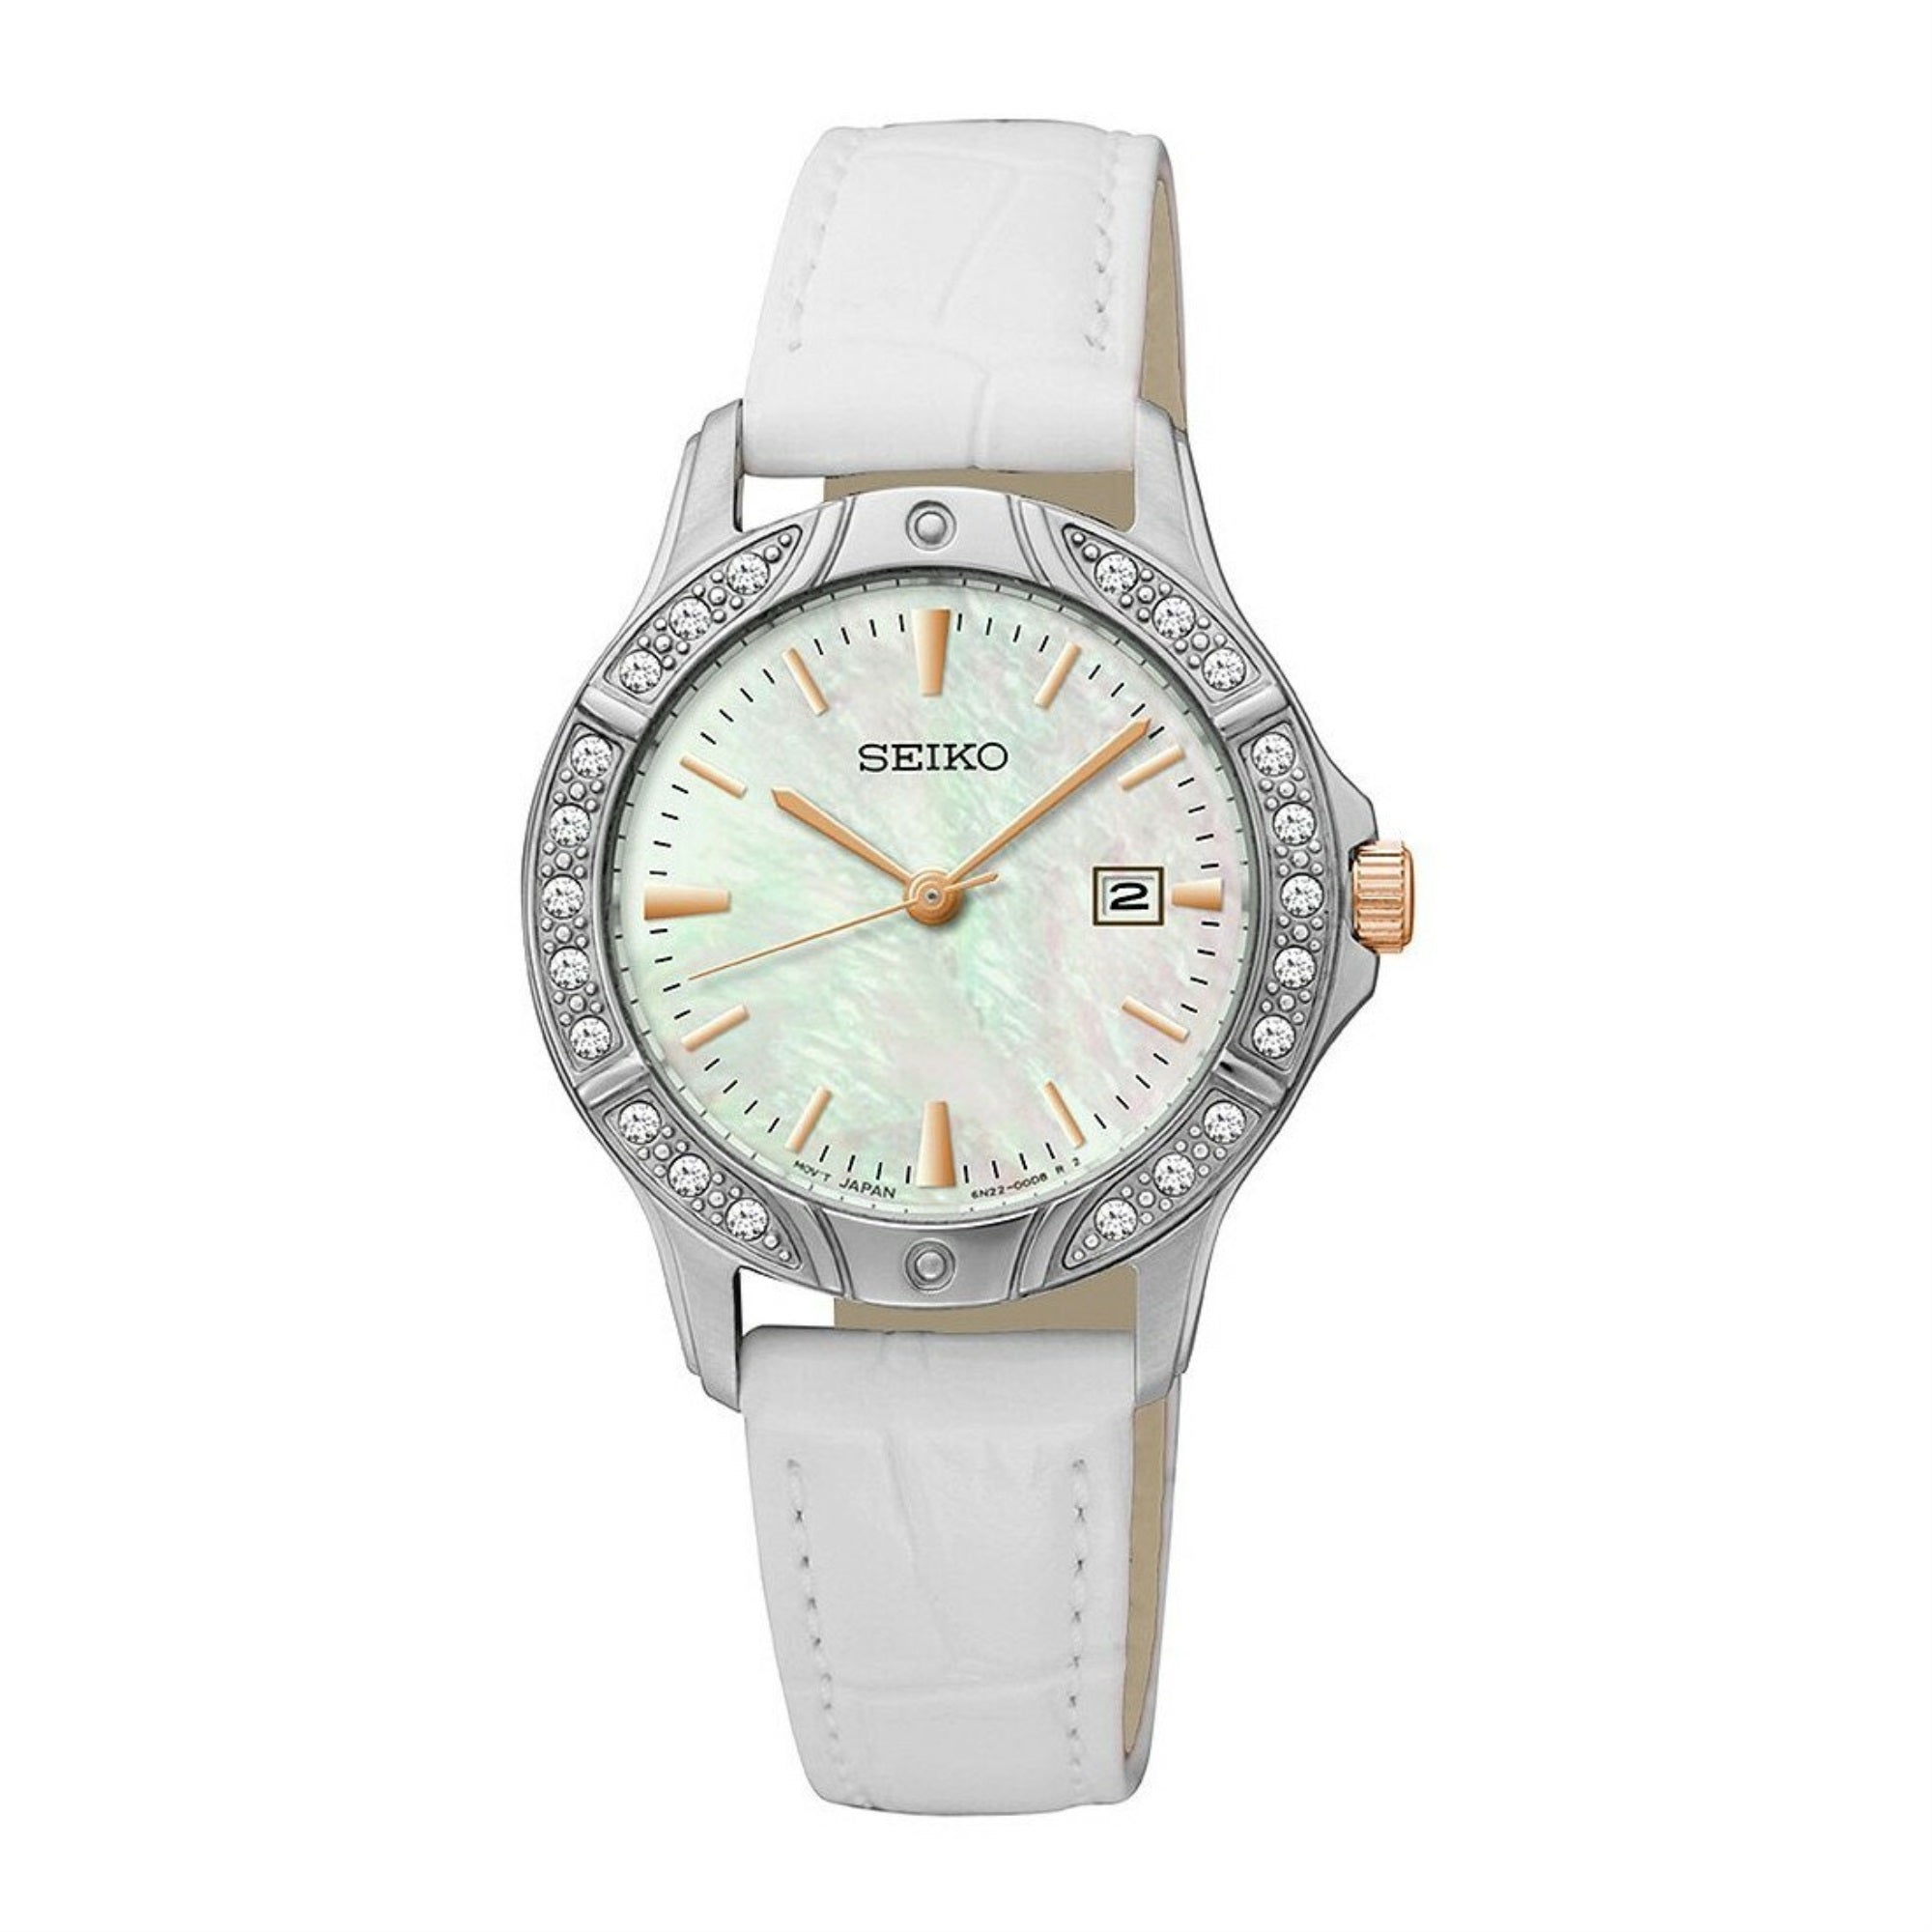 Seiko woman Seiko SUR871 White Leather Strap Crystal Accented MOP Date Dial Watch